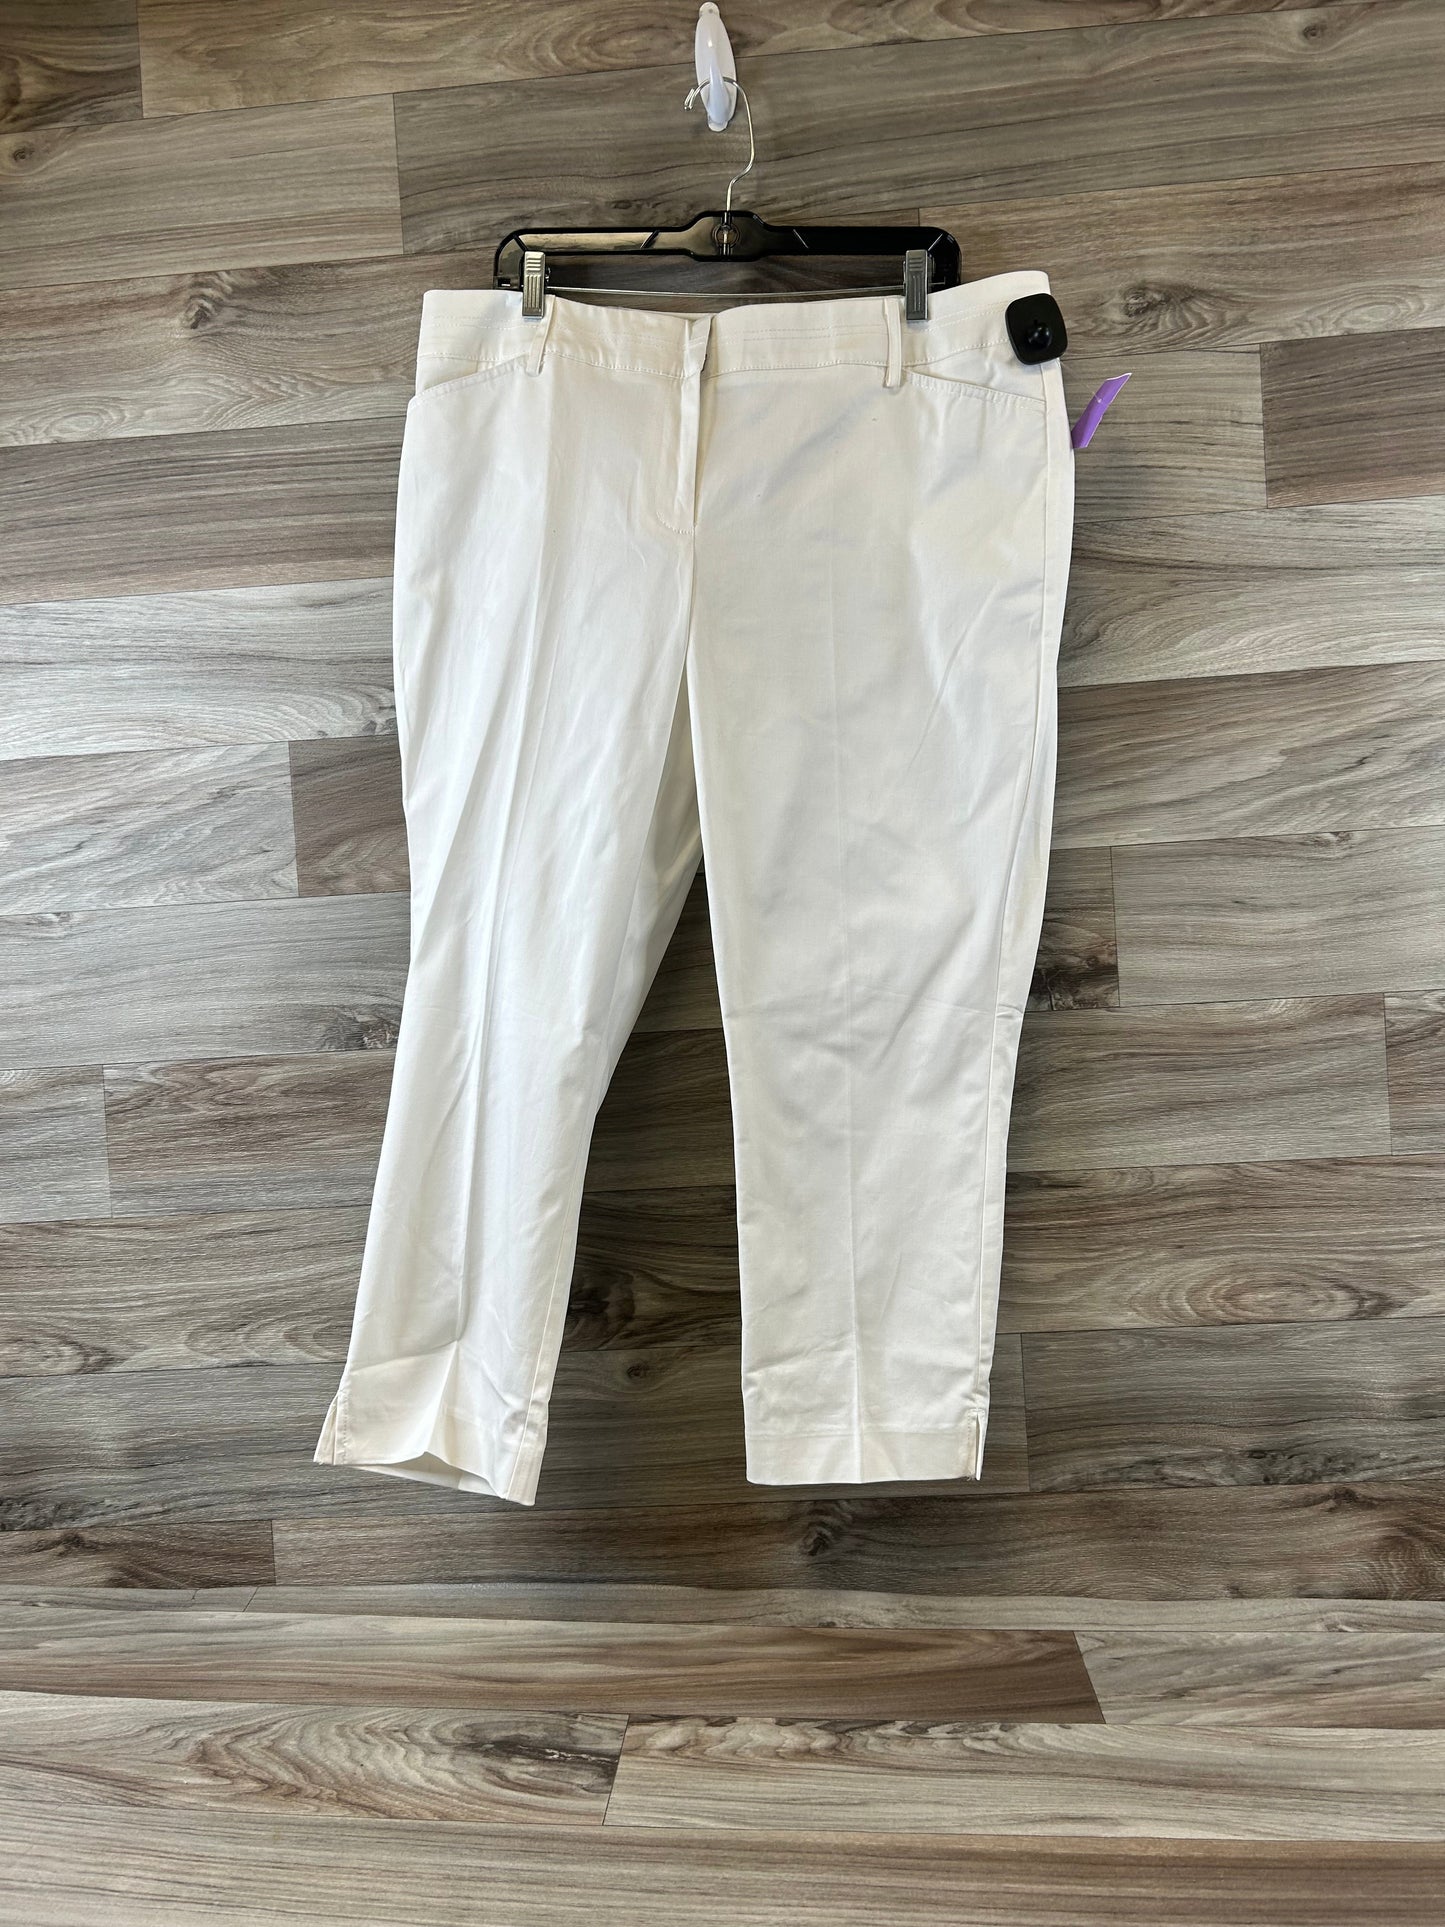 White Pants Cropped New York And Co, Size 16